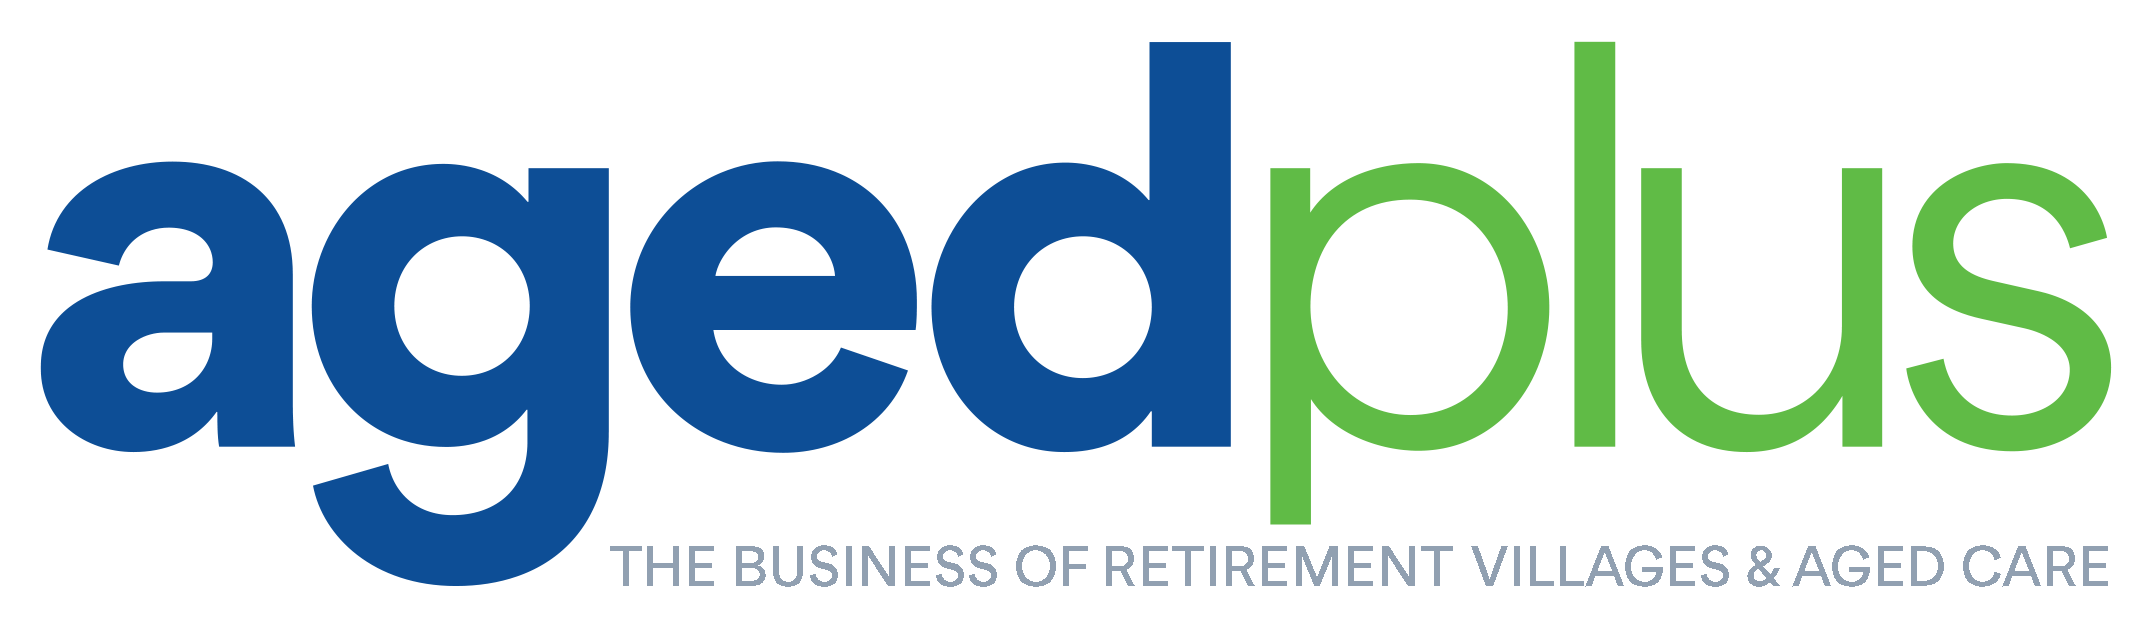 Aged Plus - The Business of Aged Care & Retirement